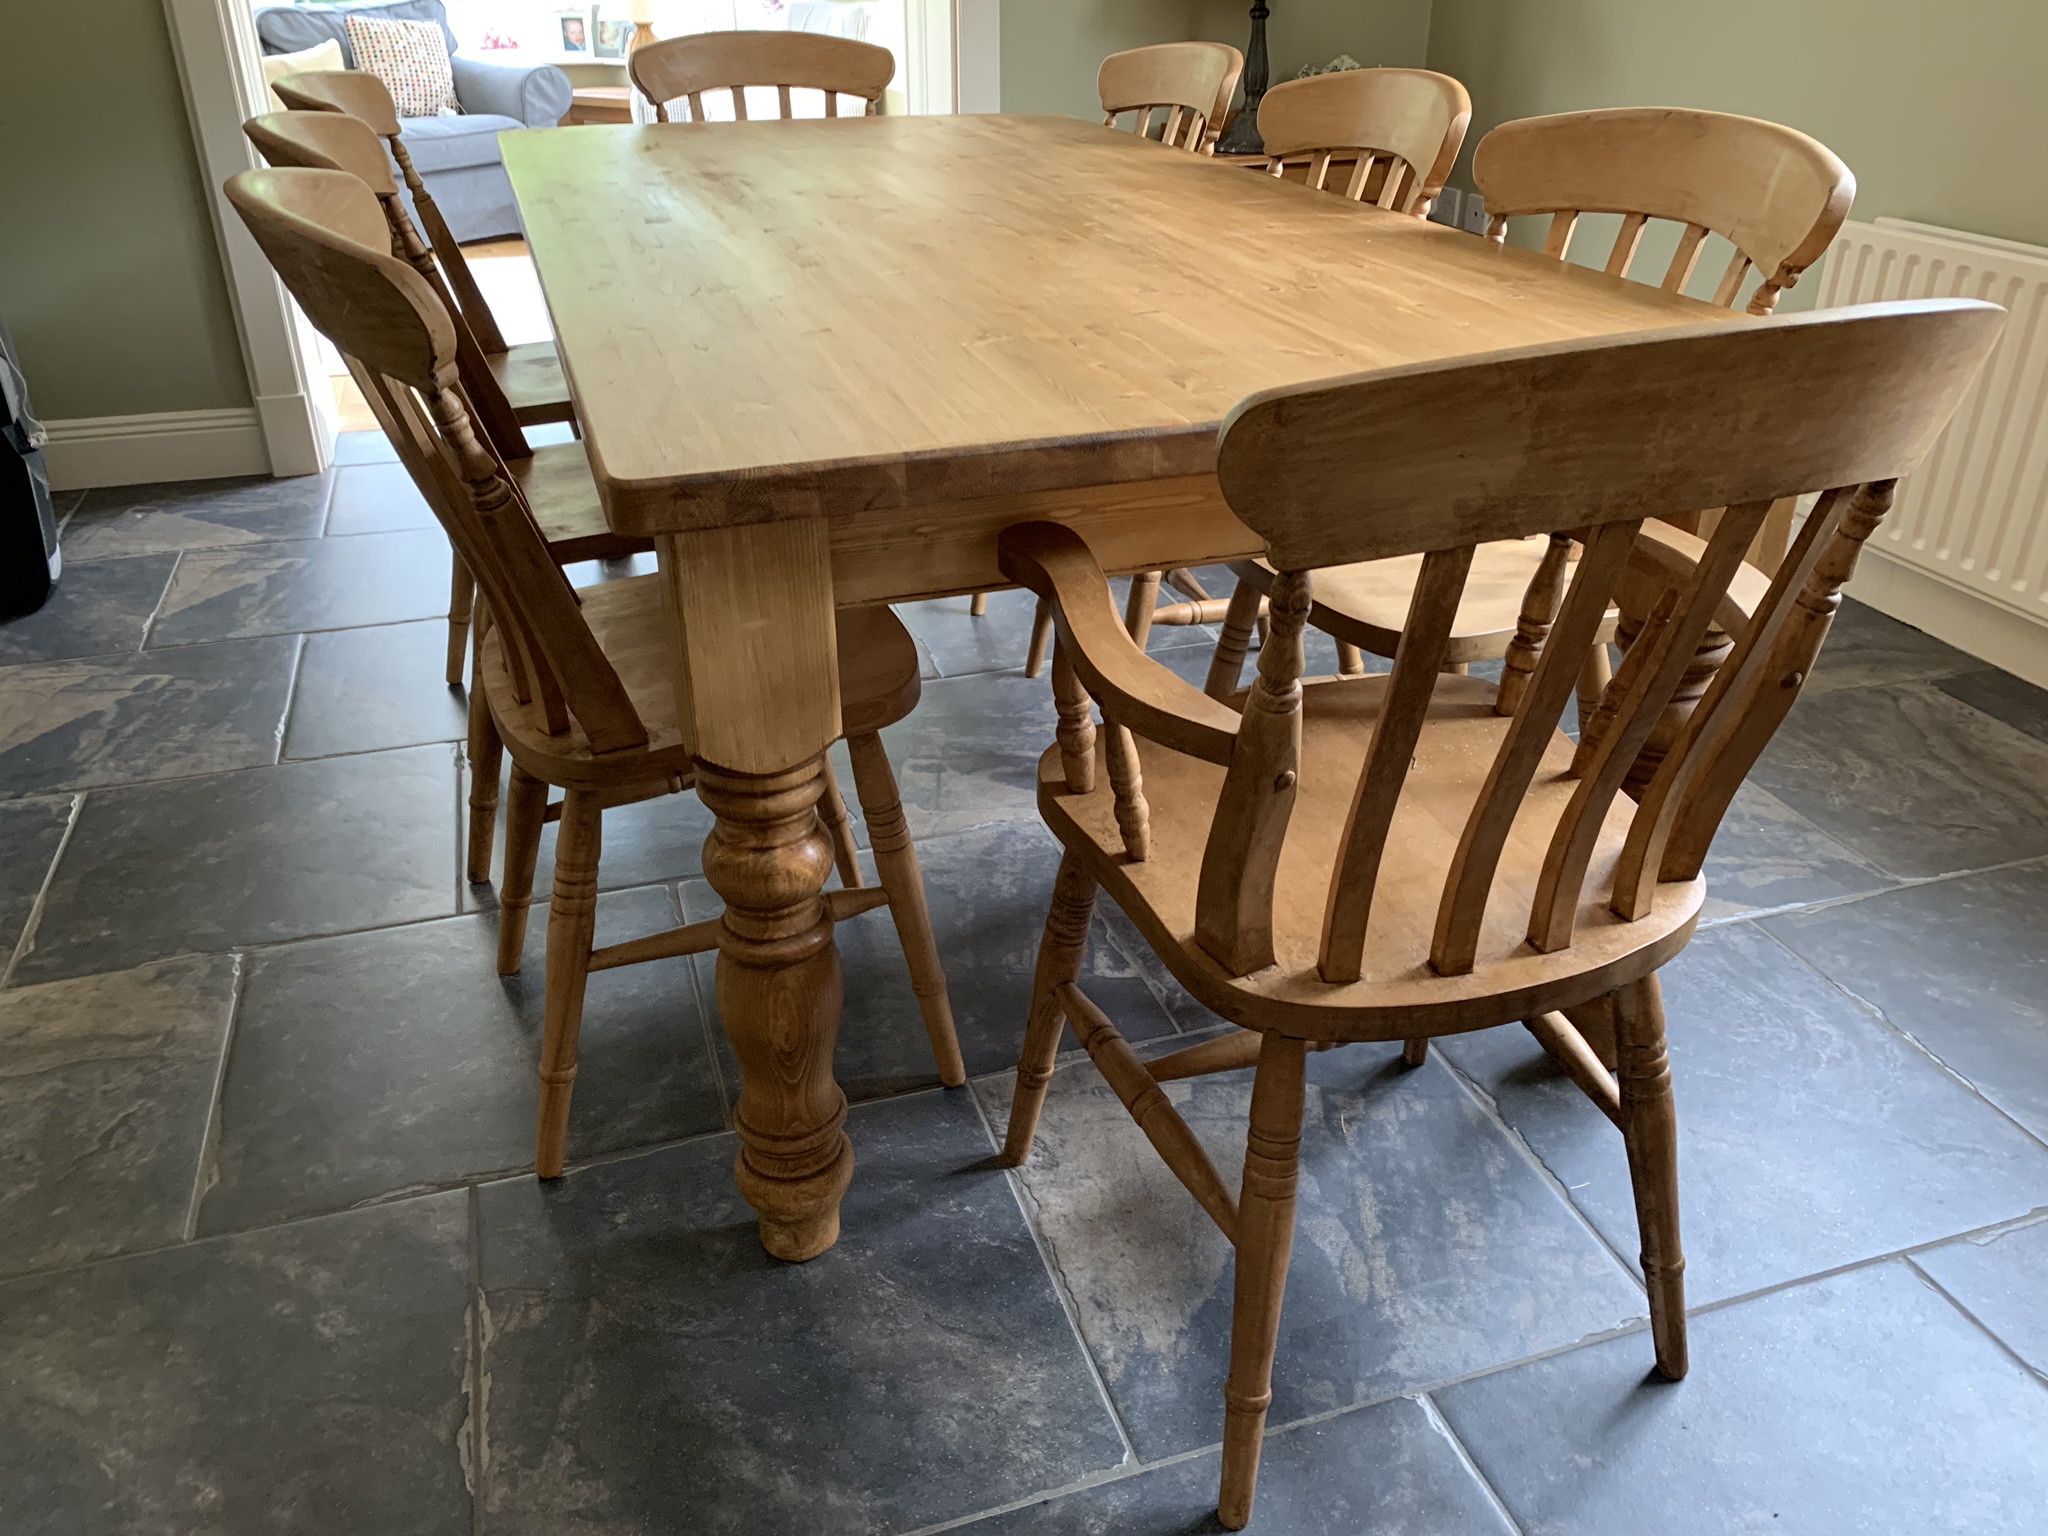 Classic Farmhouse Table With a Victorian Finish 